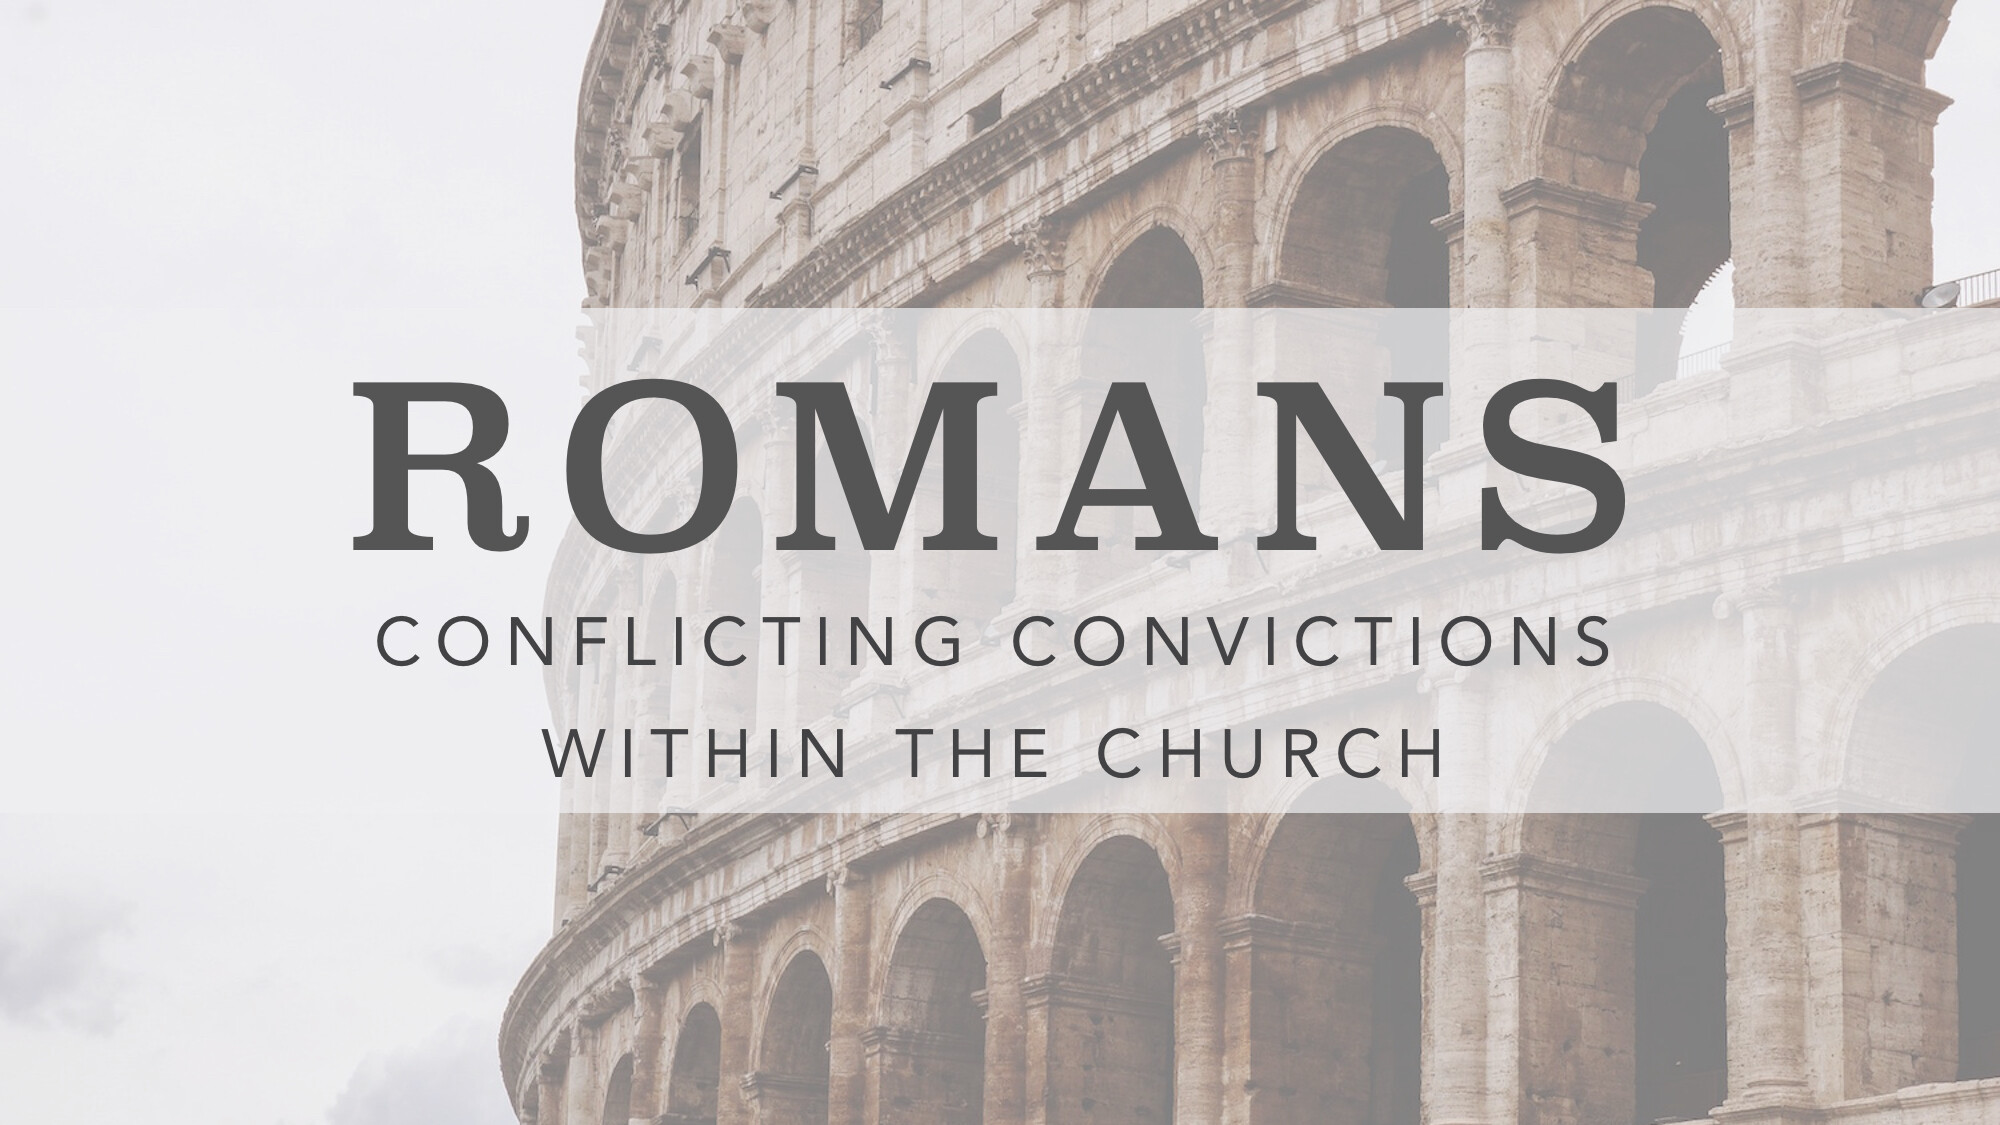 Conflicting Convictions Within the Church